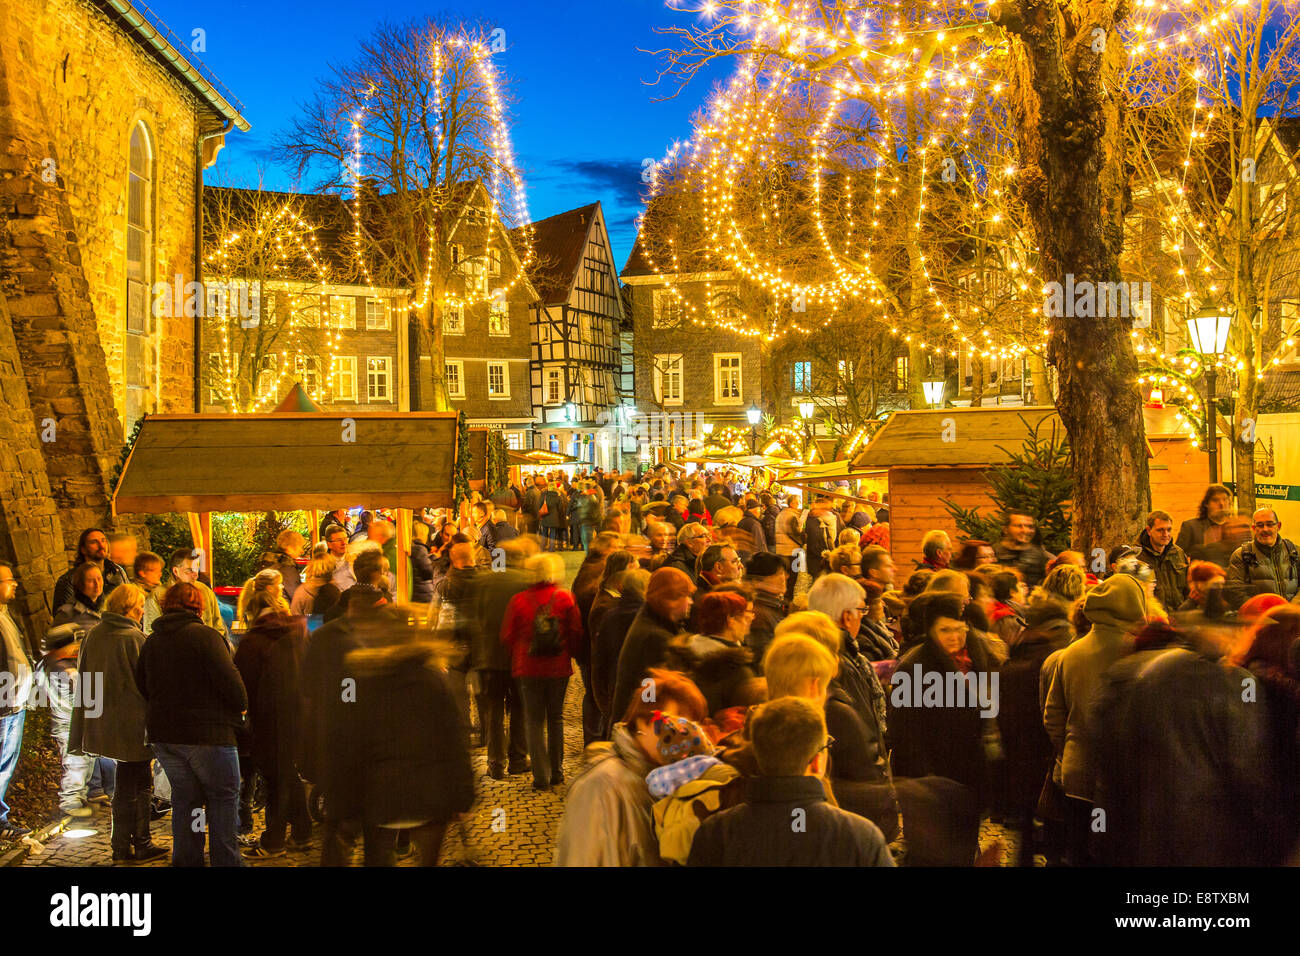 Christmas market in the historic old town of Hattingen, Germany Stock Photo